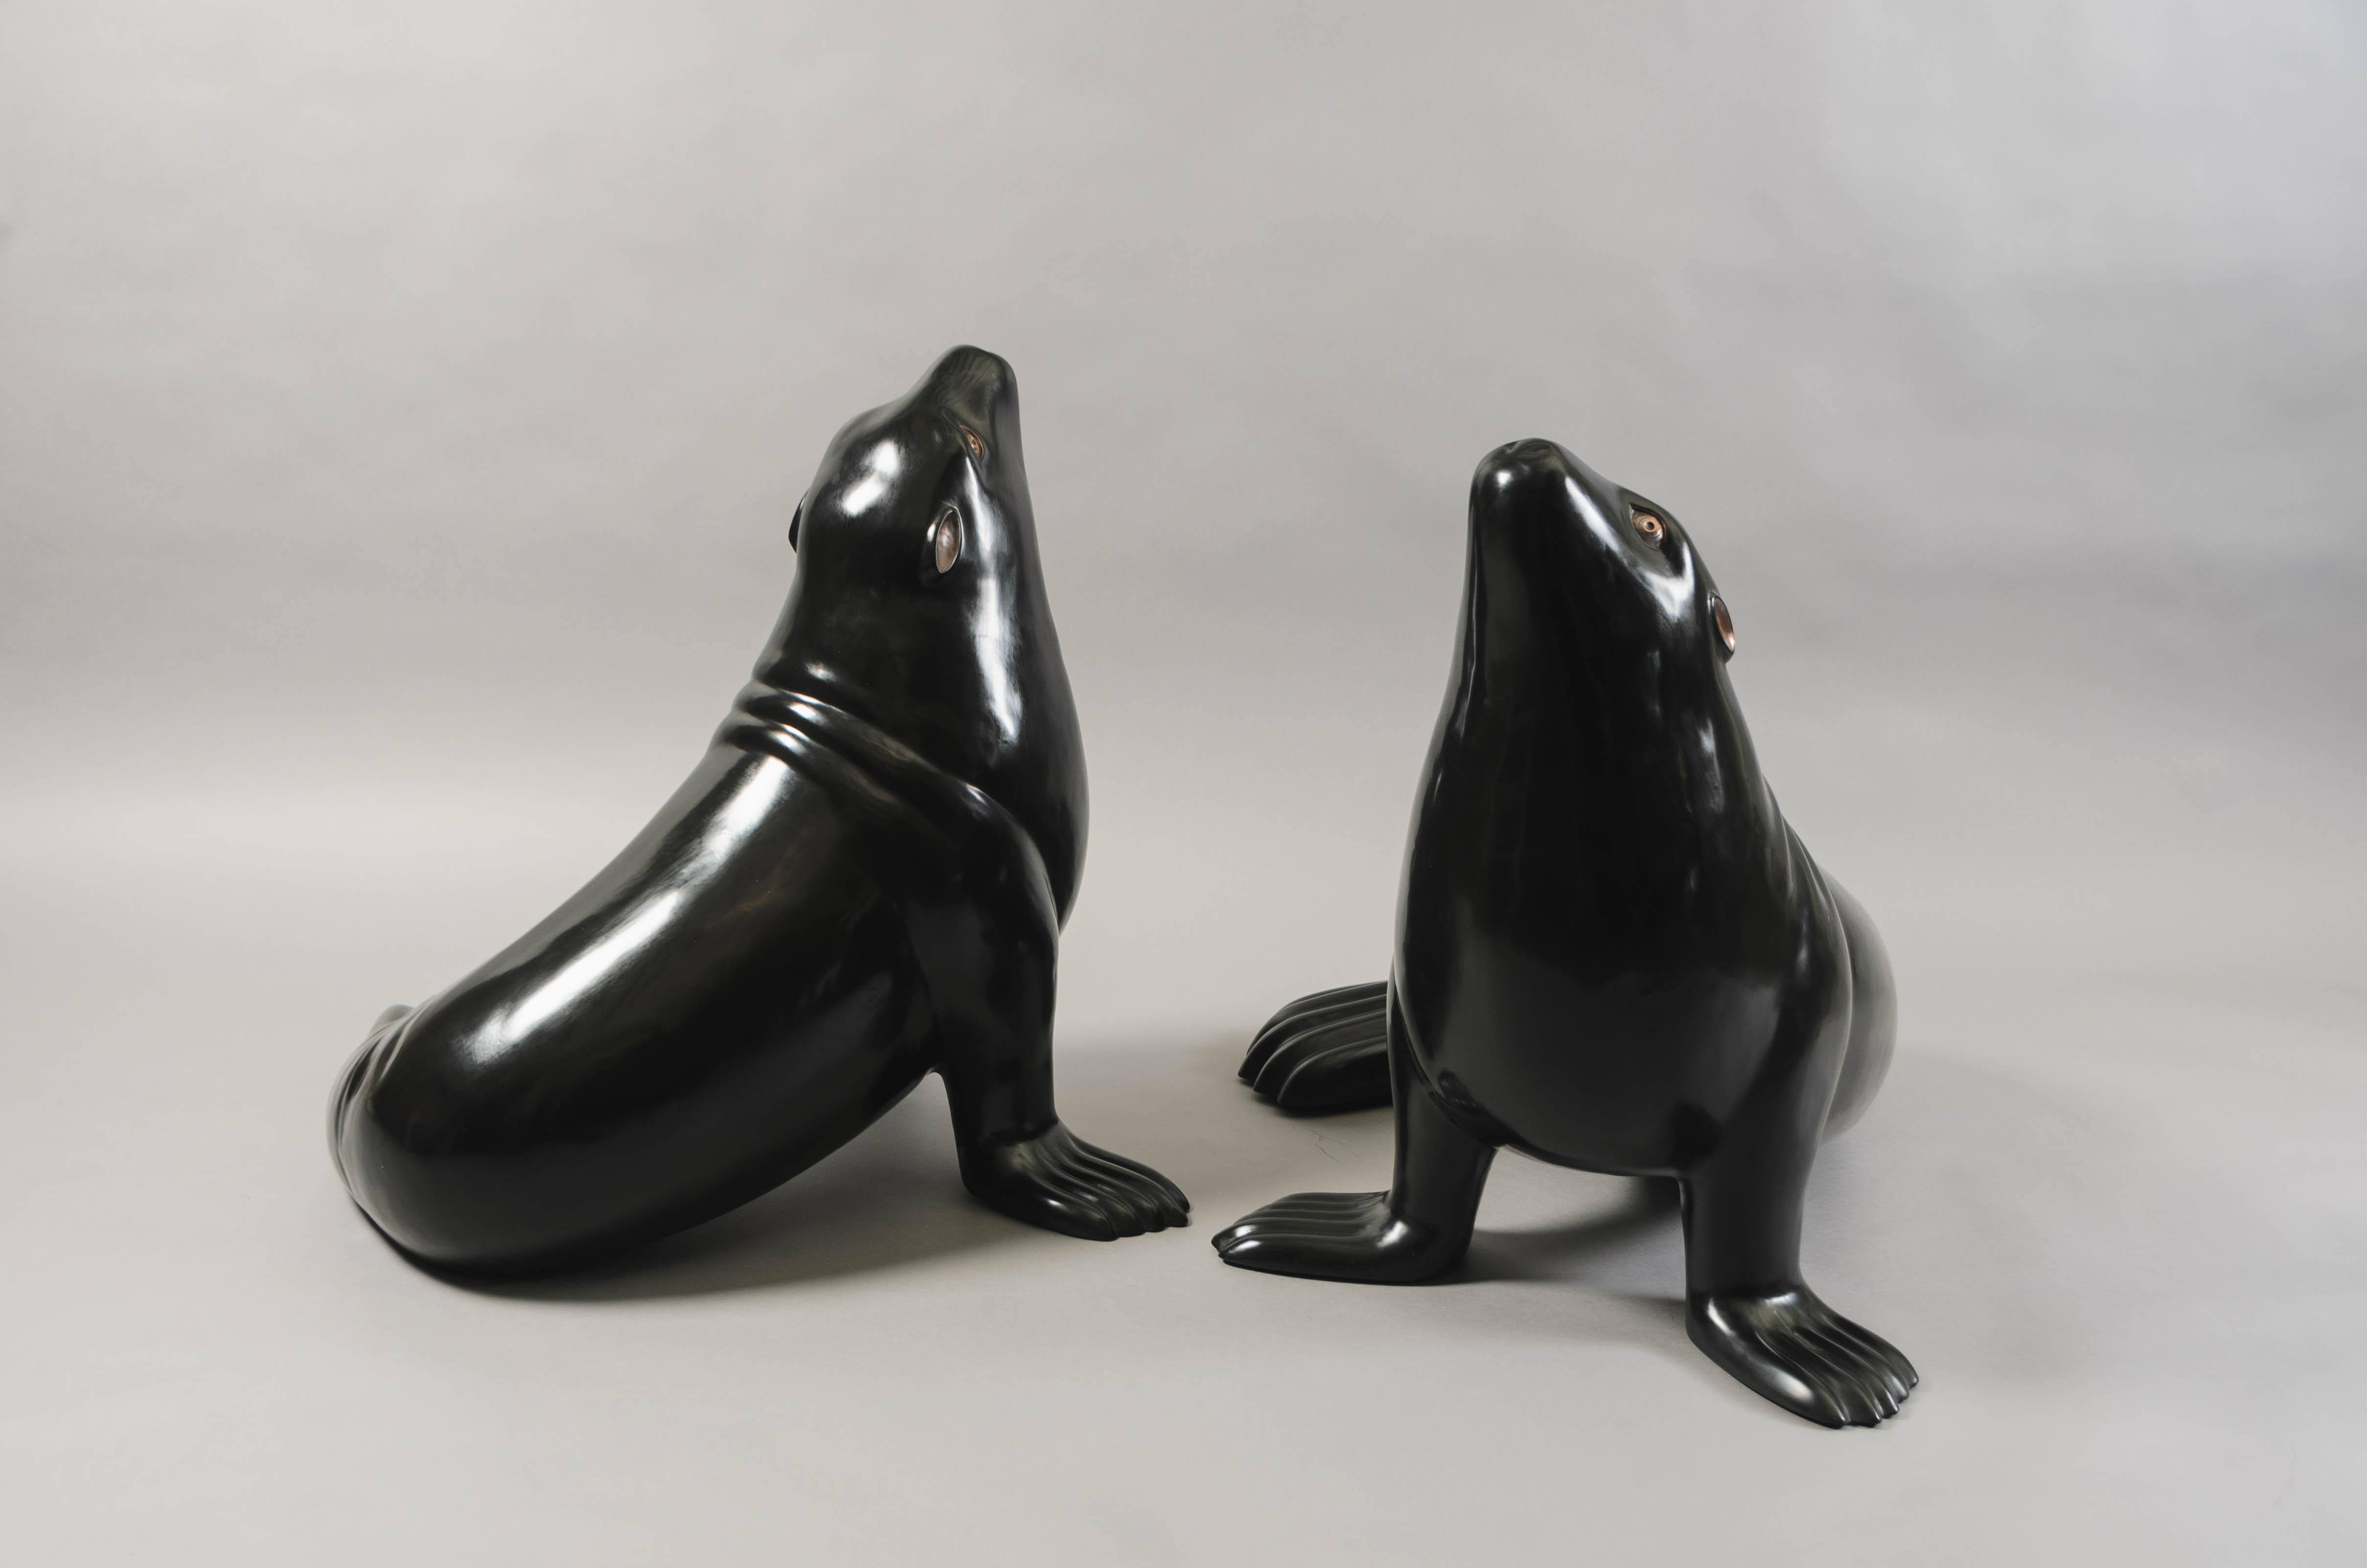 Repoussé Contemporary Black Lacquer Sea Lion Sculpture by Robert Kuo, Limited Edition For Sale